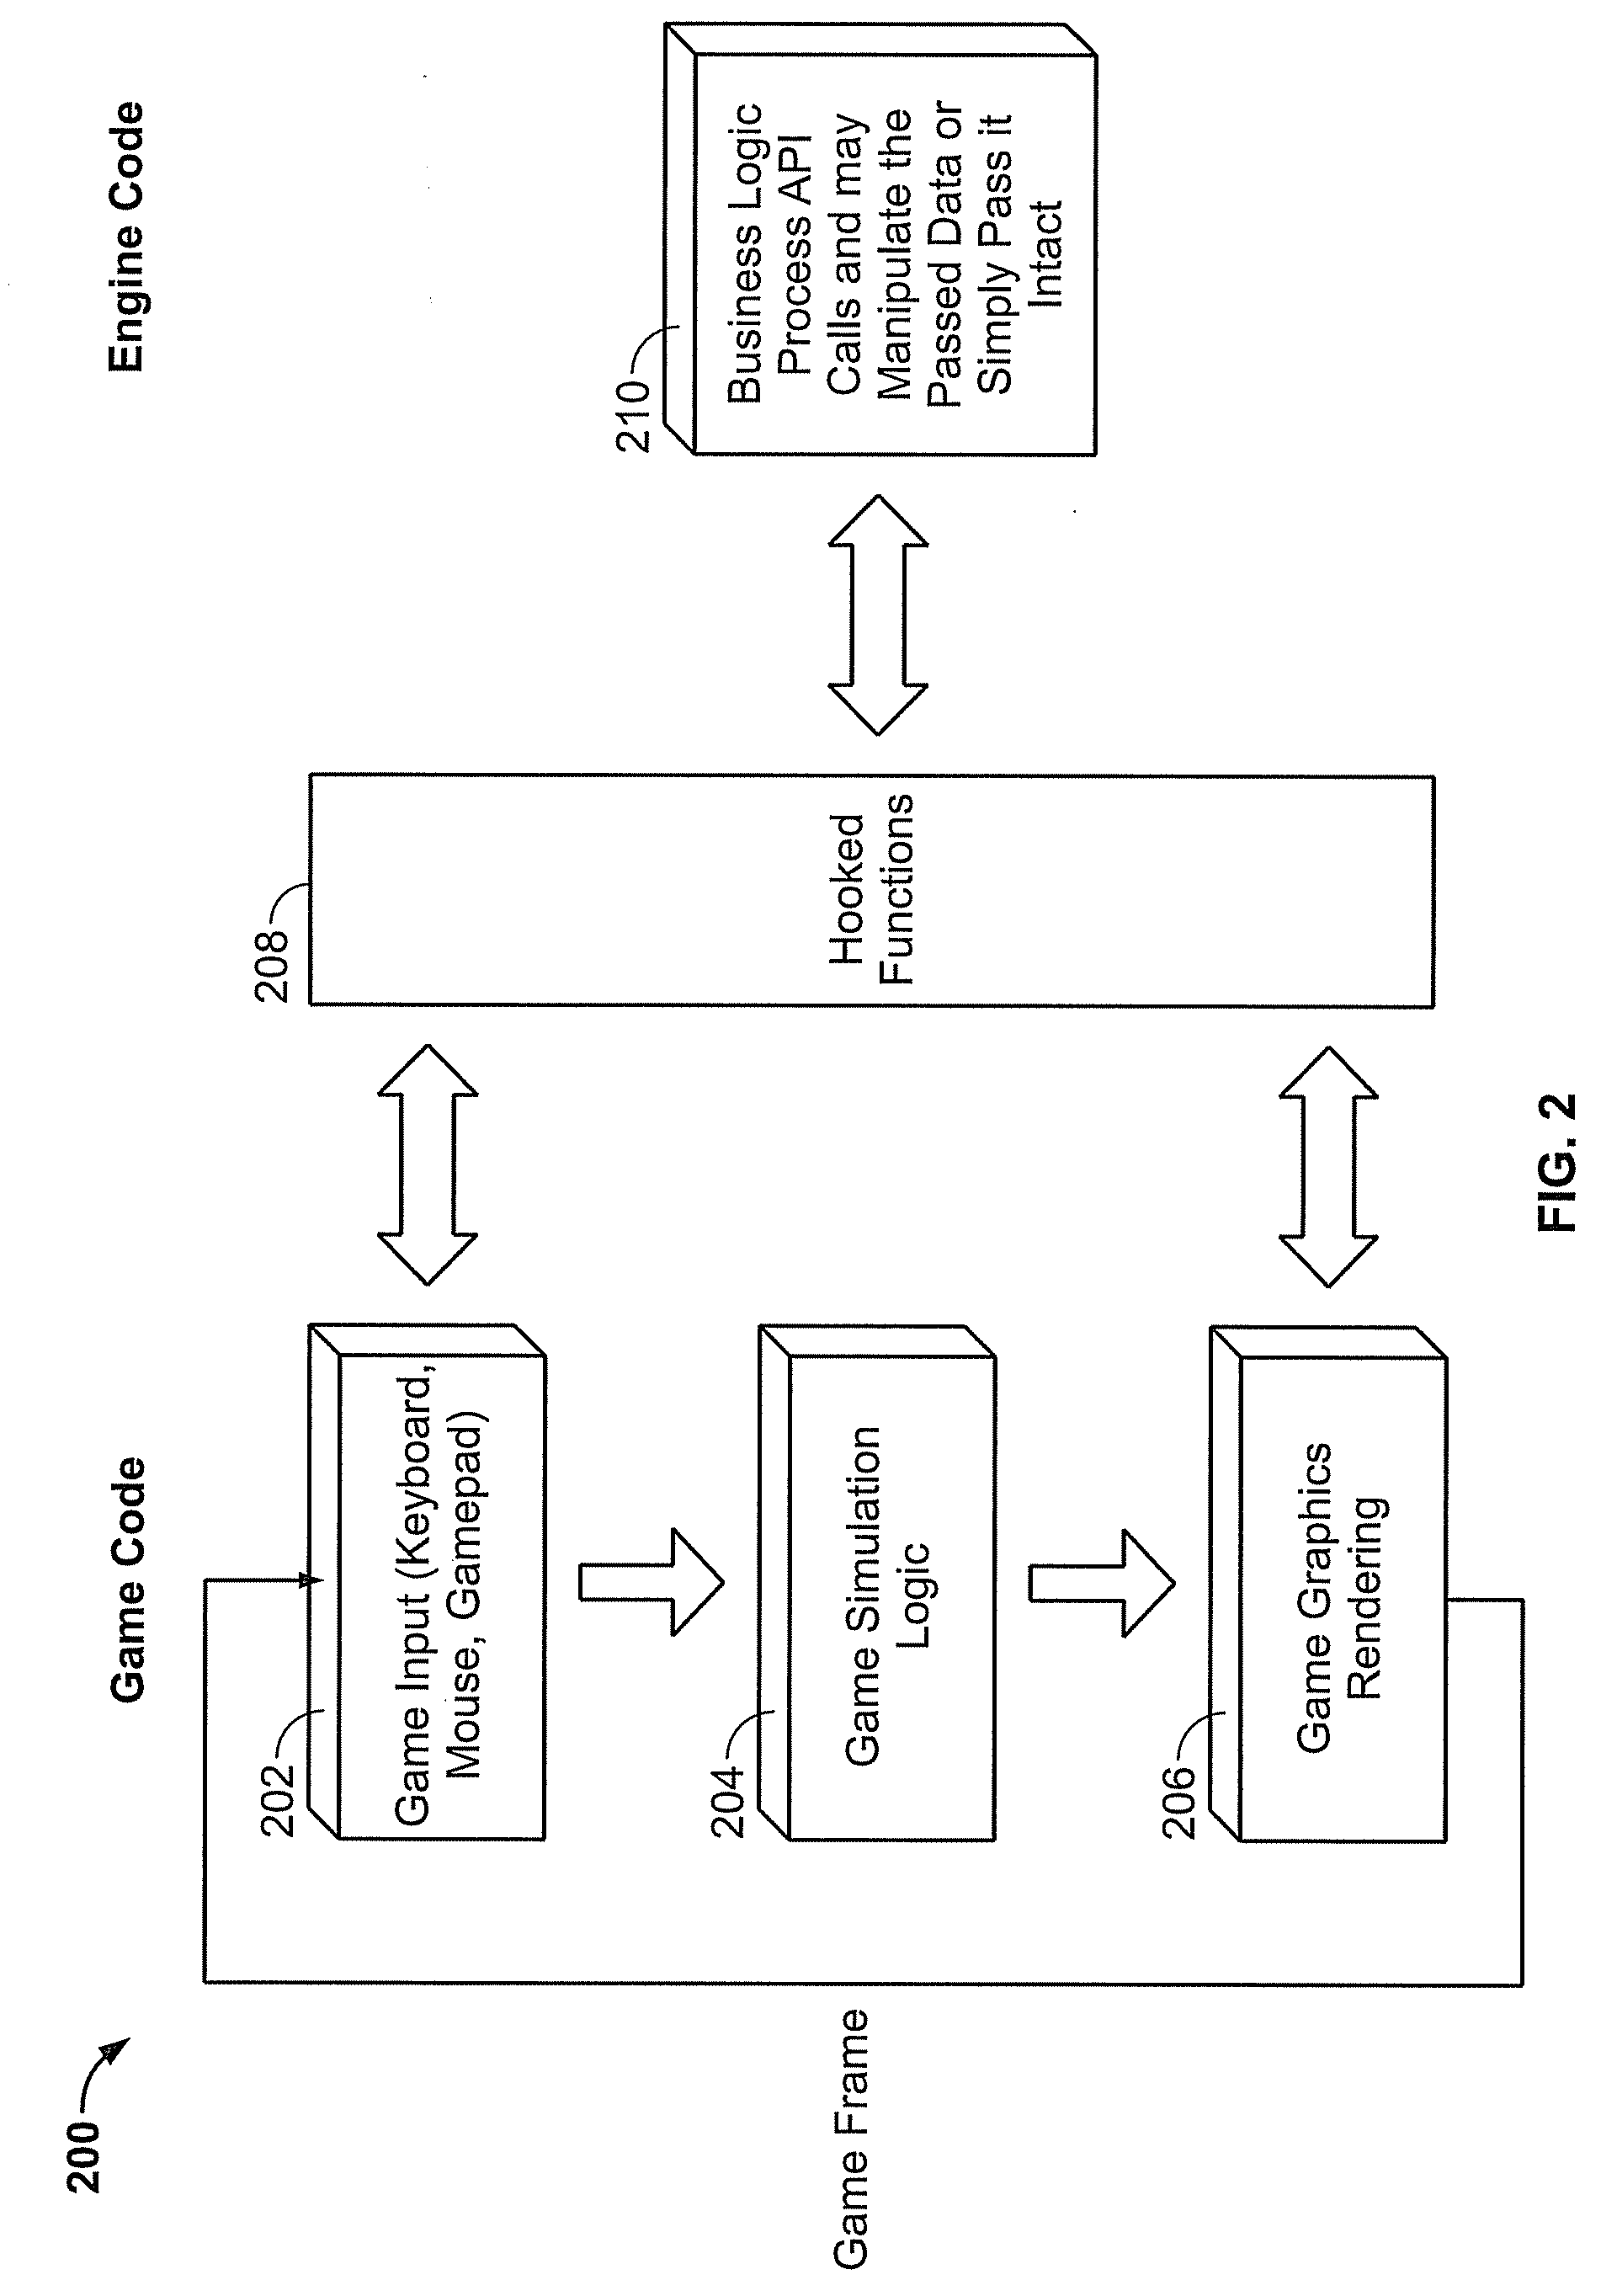 Independently-defined alteration of output from software executable using later-integrated code